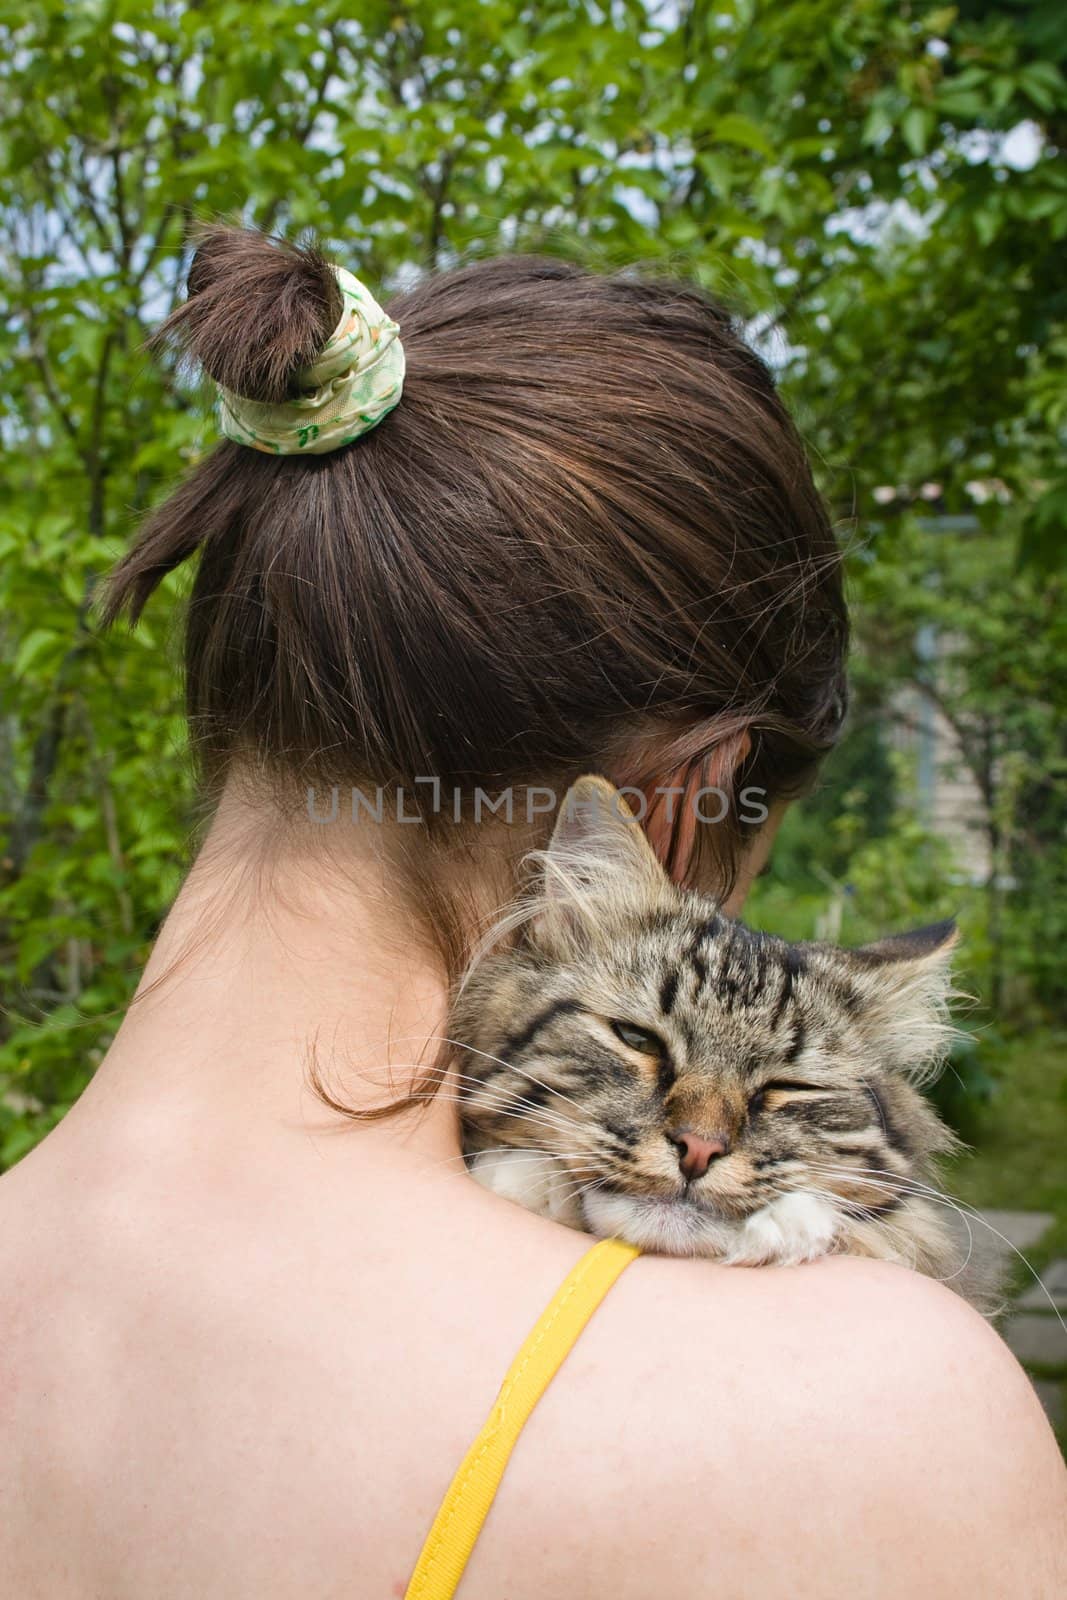  Girl And Her Cat by nikolpetr